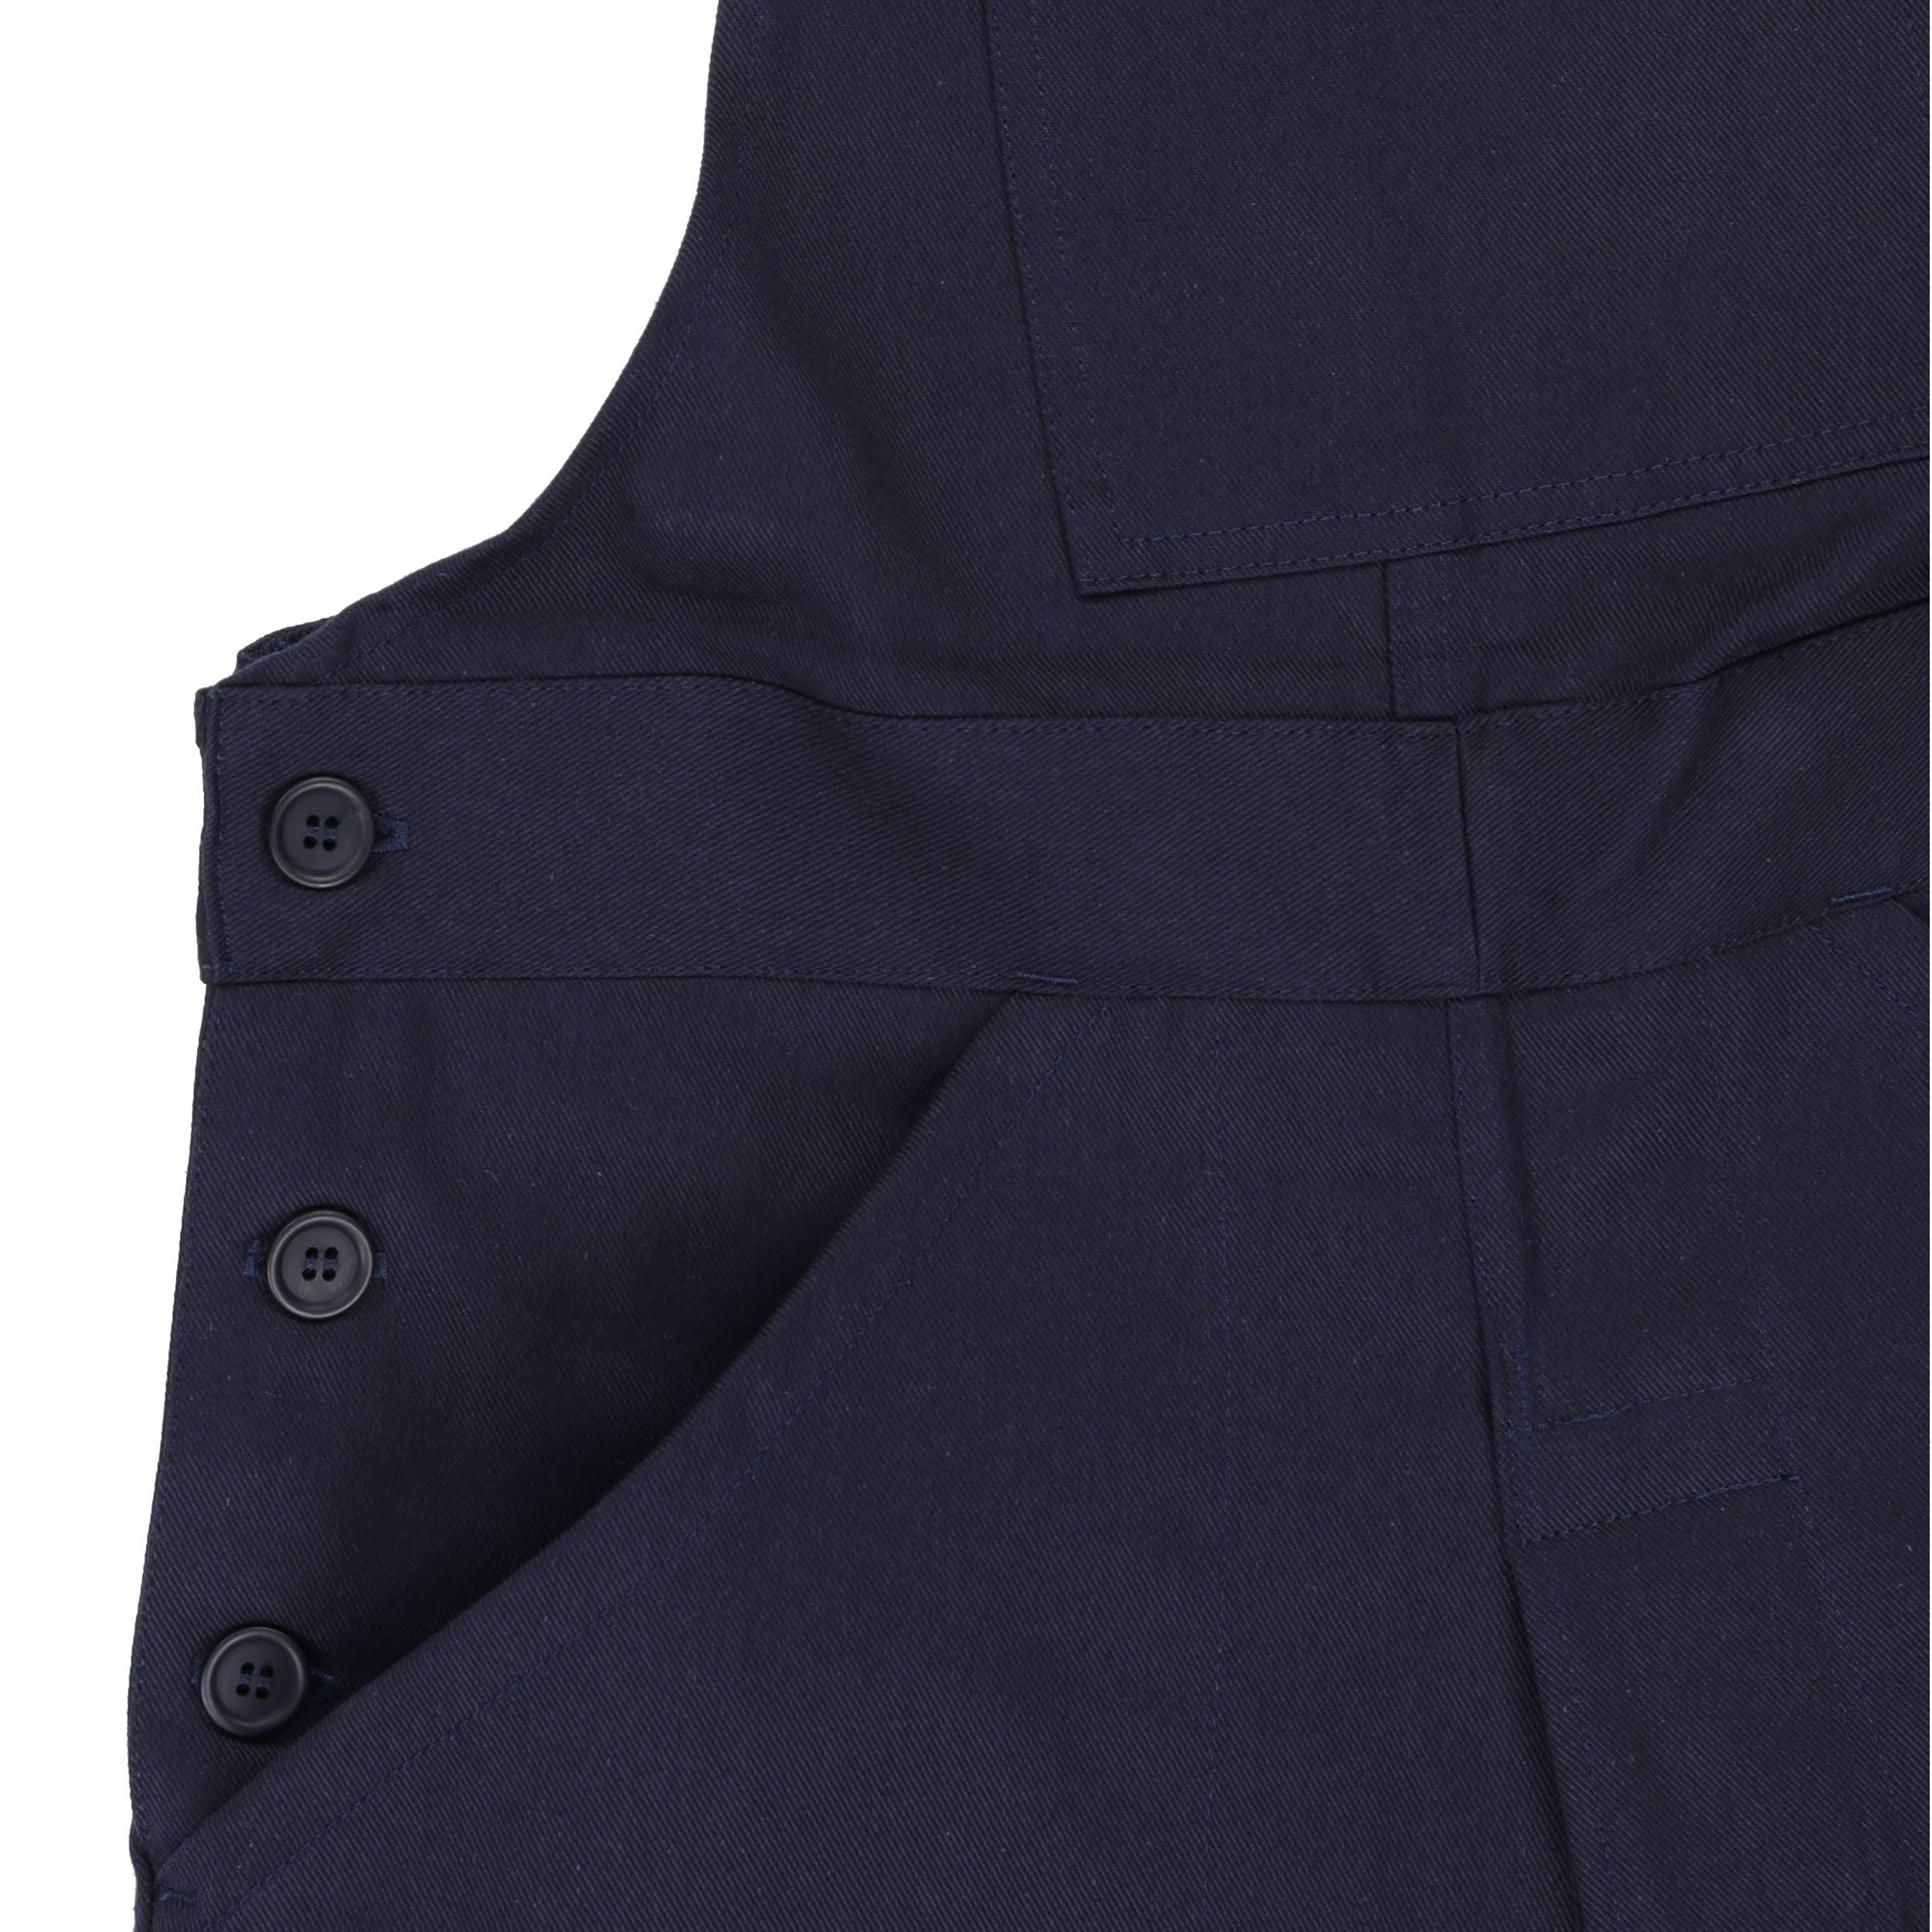 Close up of the button detail and pockets of the navy Carrier Company Men's Dungarees